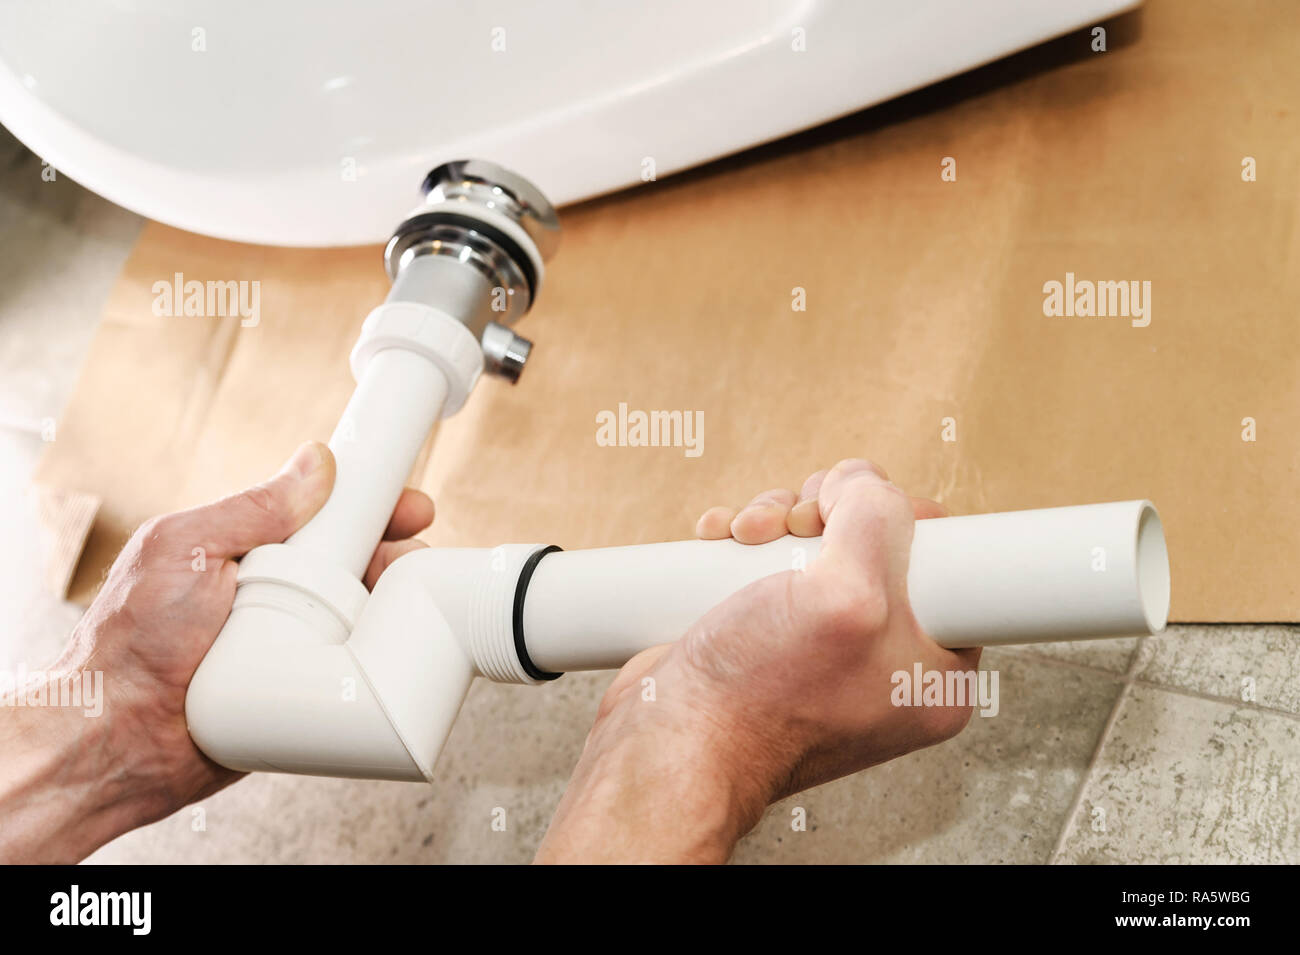 Hands man mounted sewer drain with pop-up waste for bidet Stock Photo -  Alamy